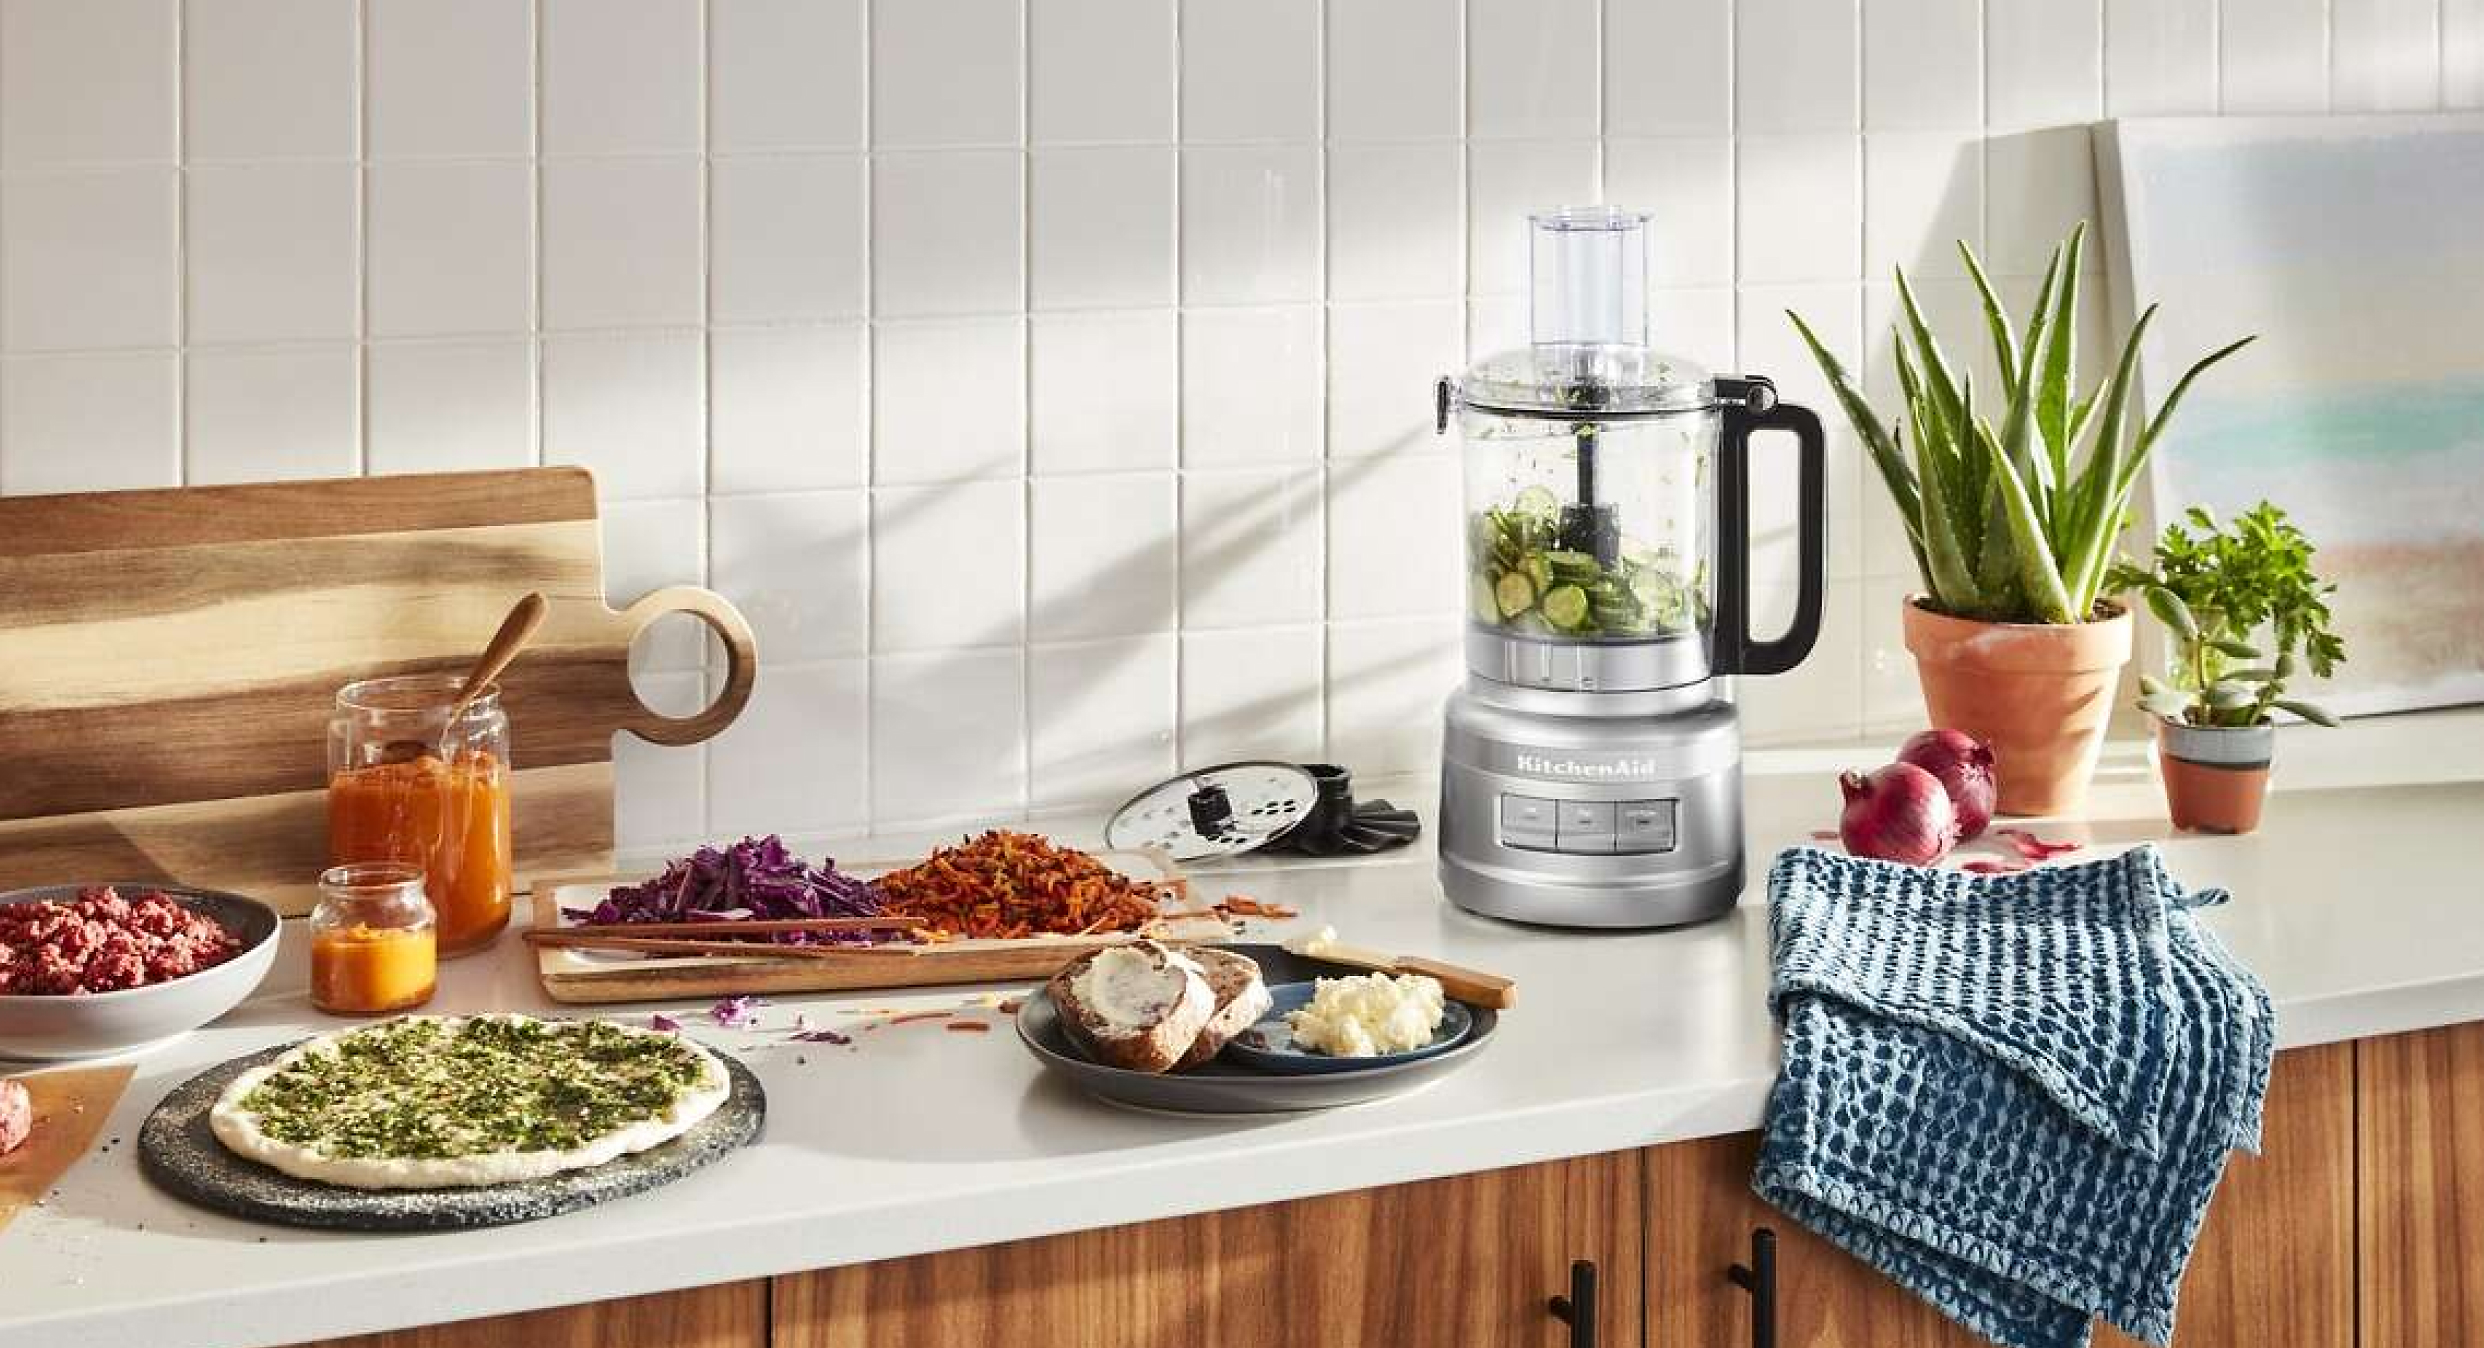 A bright kitchen with a food processor and food on the counter.